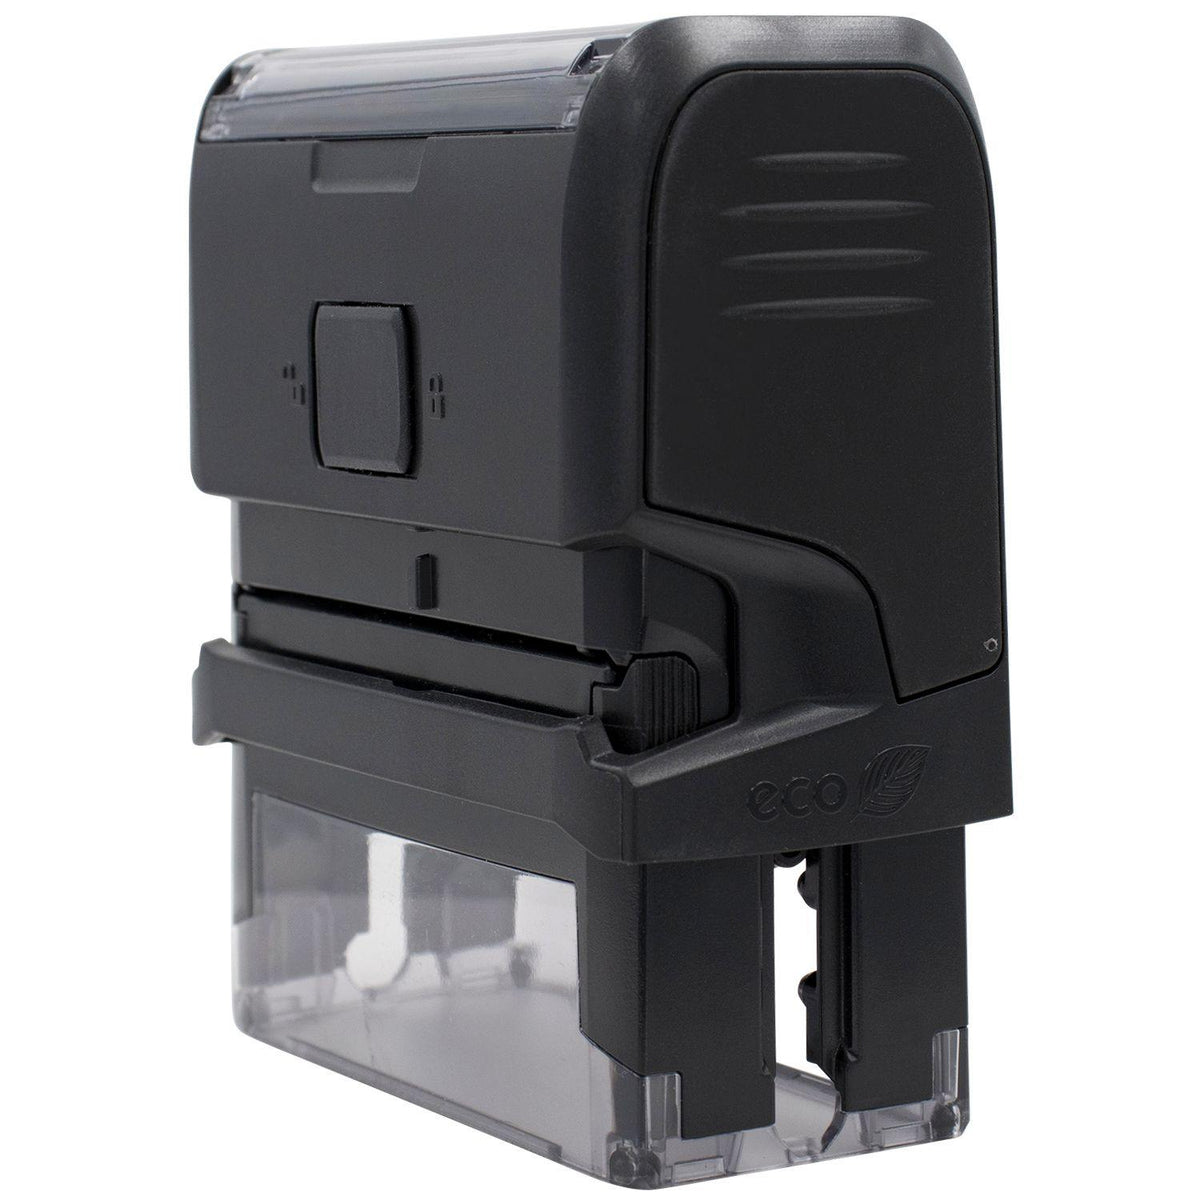 Self Inking Thank You Stamp - Engineer Seal Stamps - Brand_Trodat, Impression Size_Small, Stamp Type_Self-Inking Stamp, Type of Use_Office